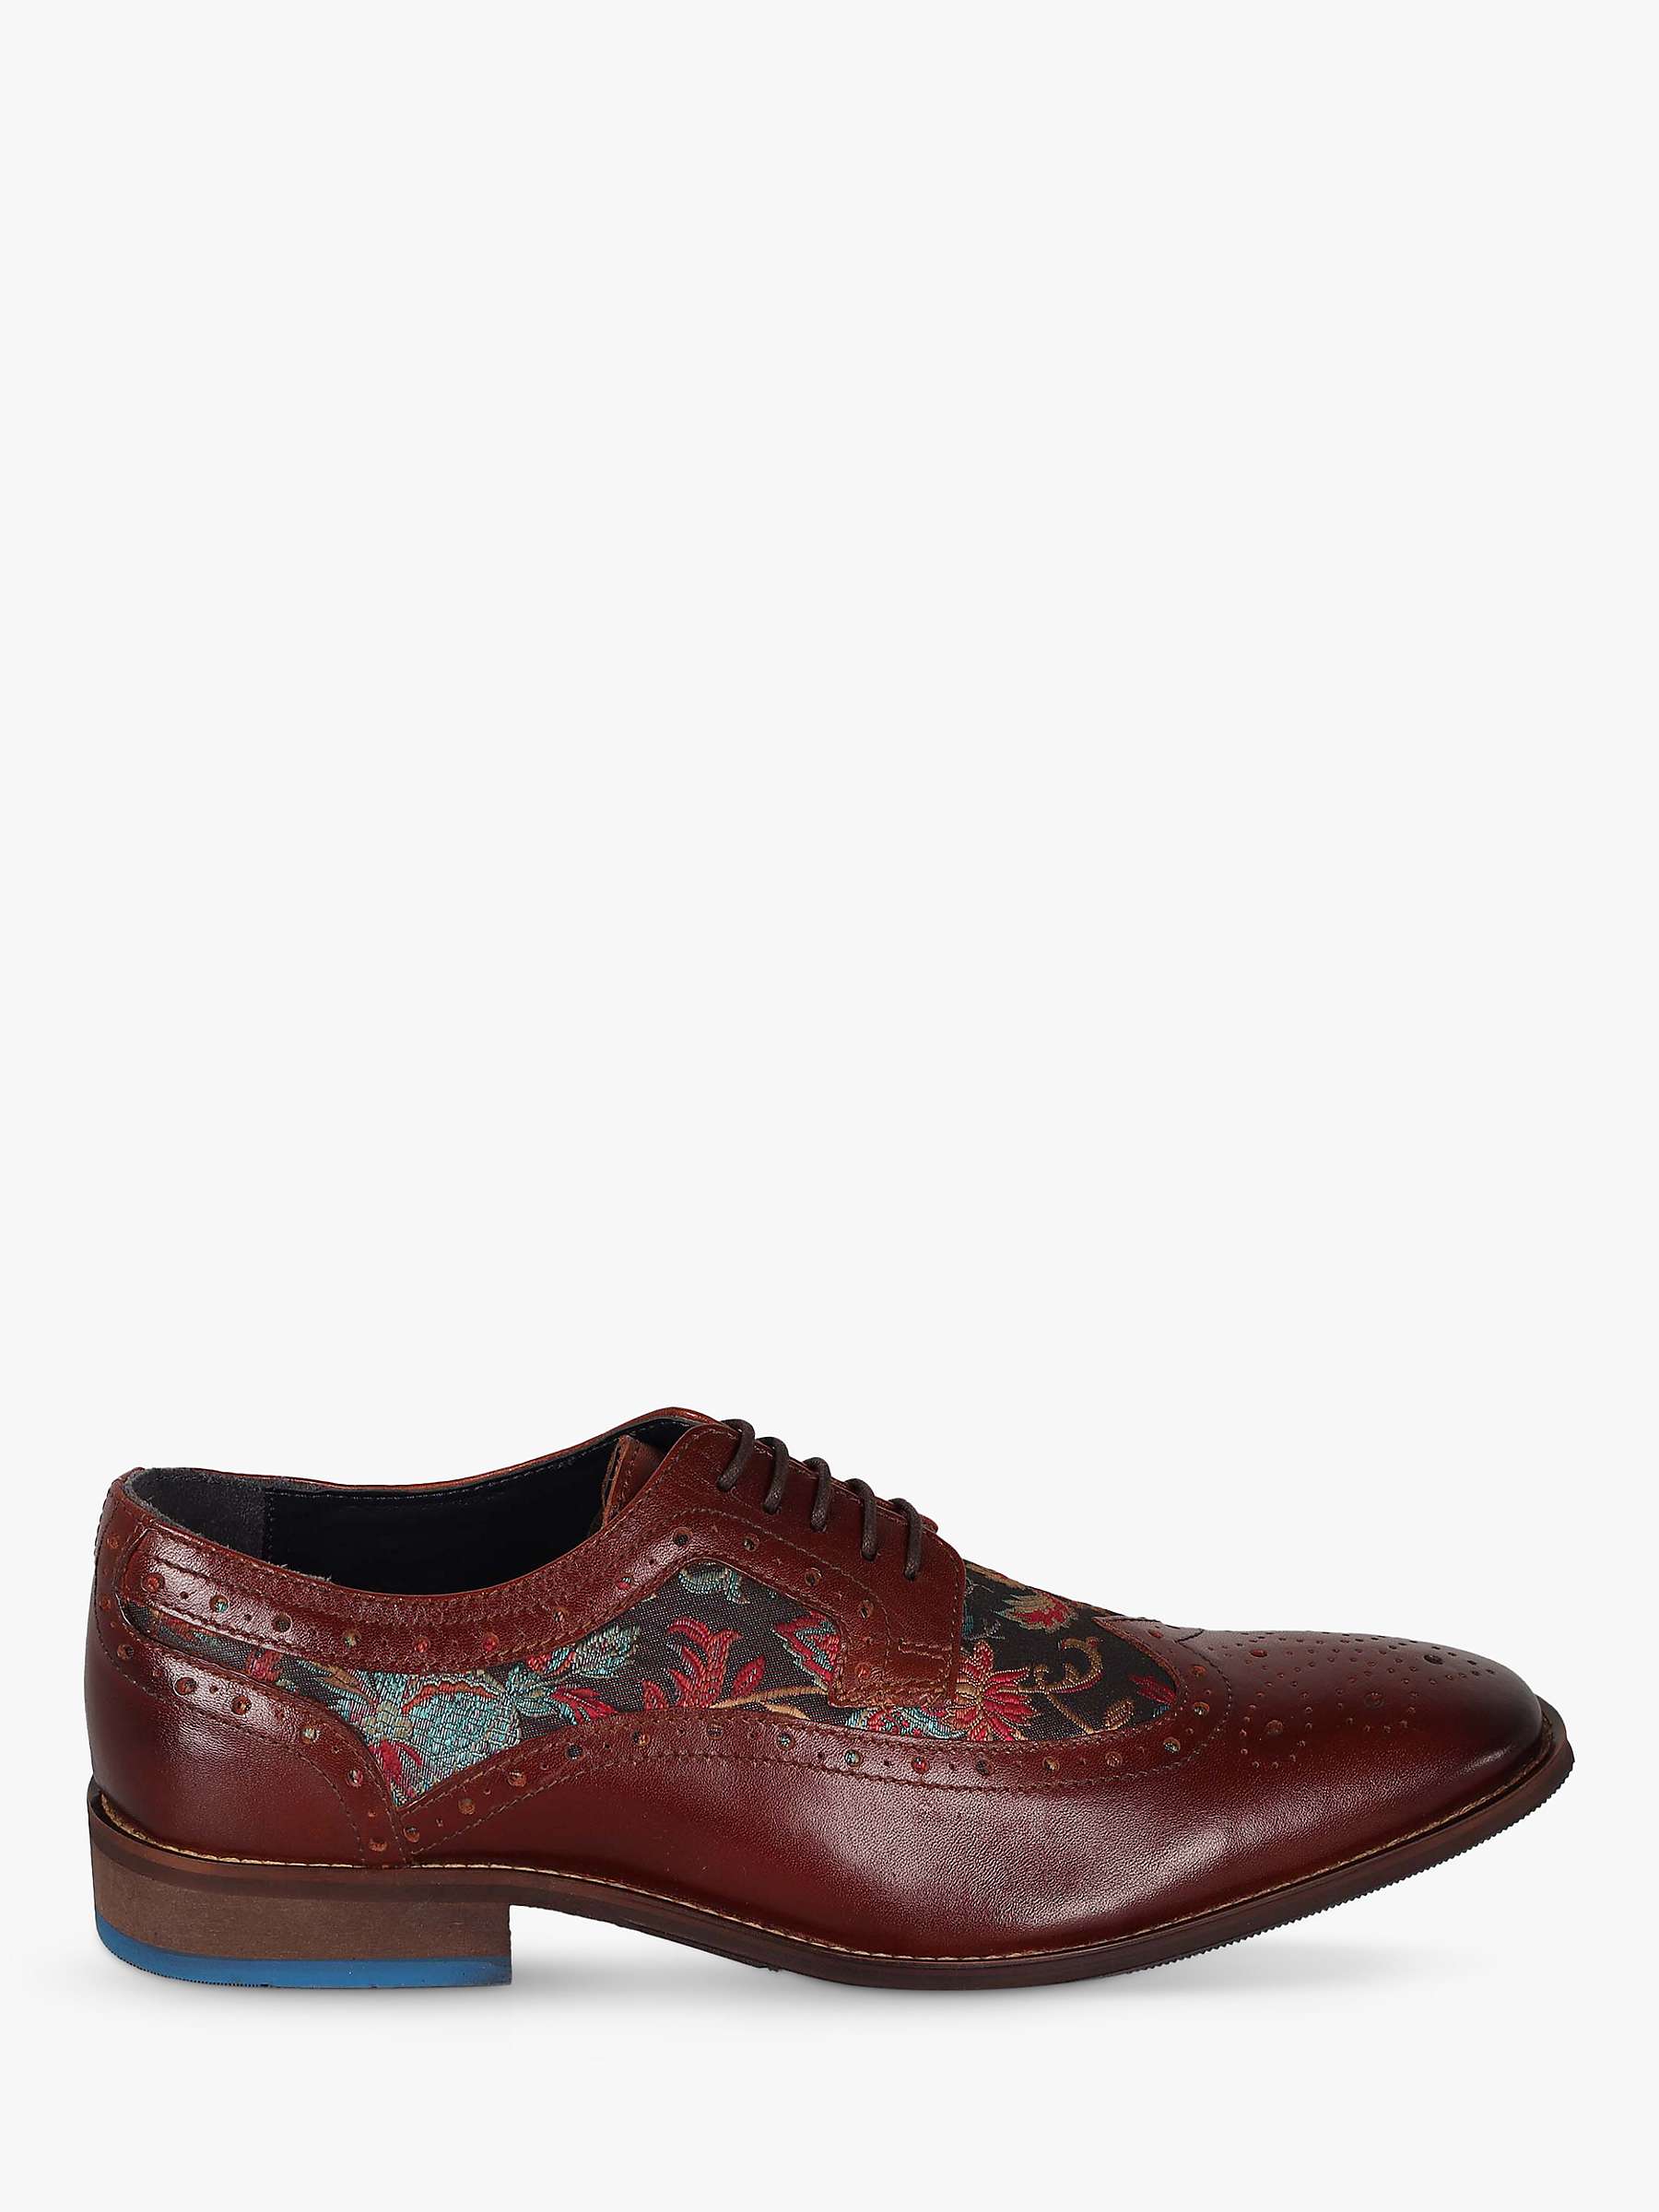 Buy Silver Street London Amen Collection Ennis Leather Brogues, Tan/Multi Online at johnlewis.com